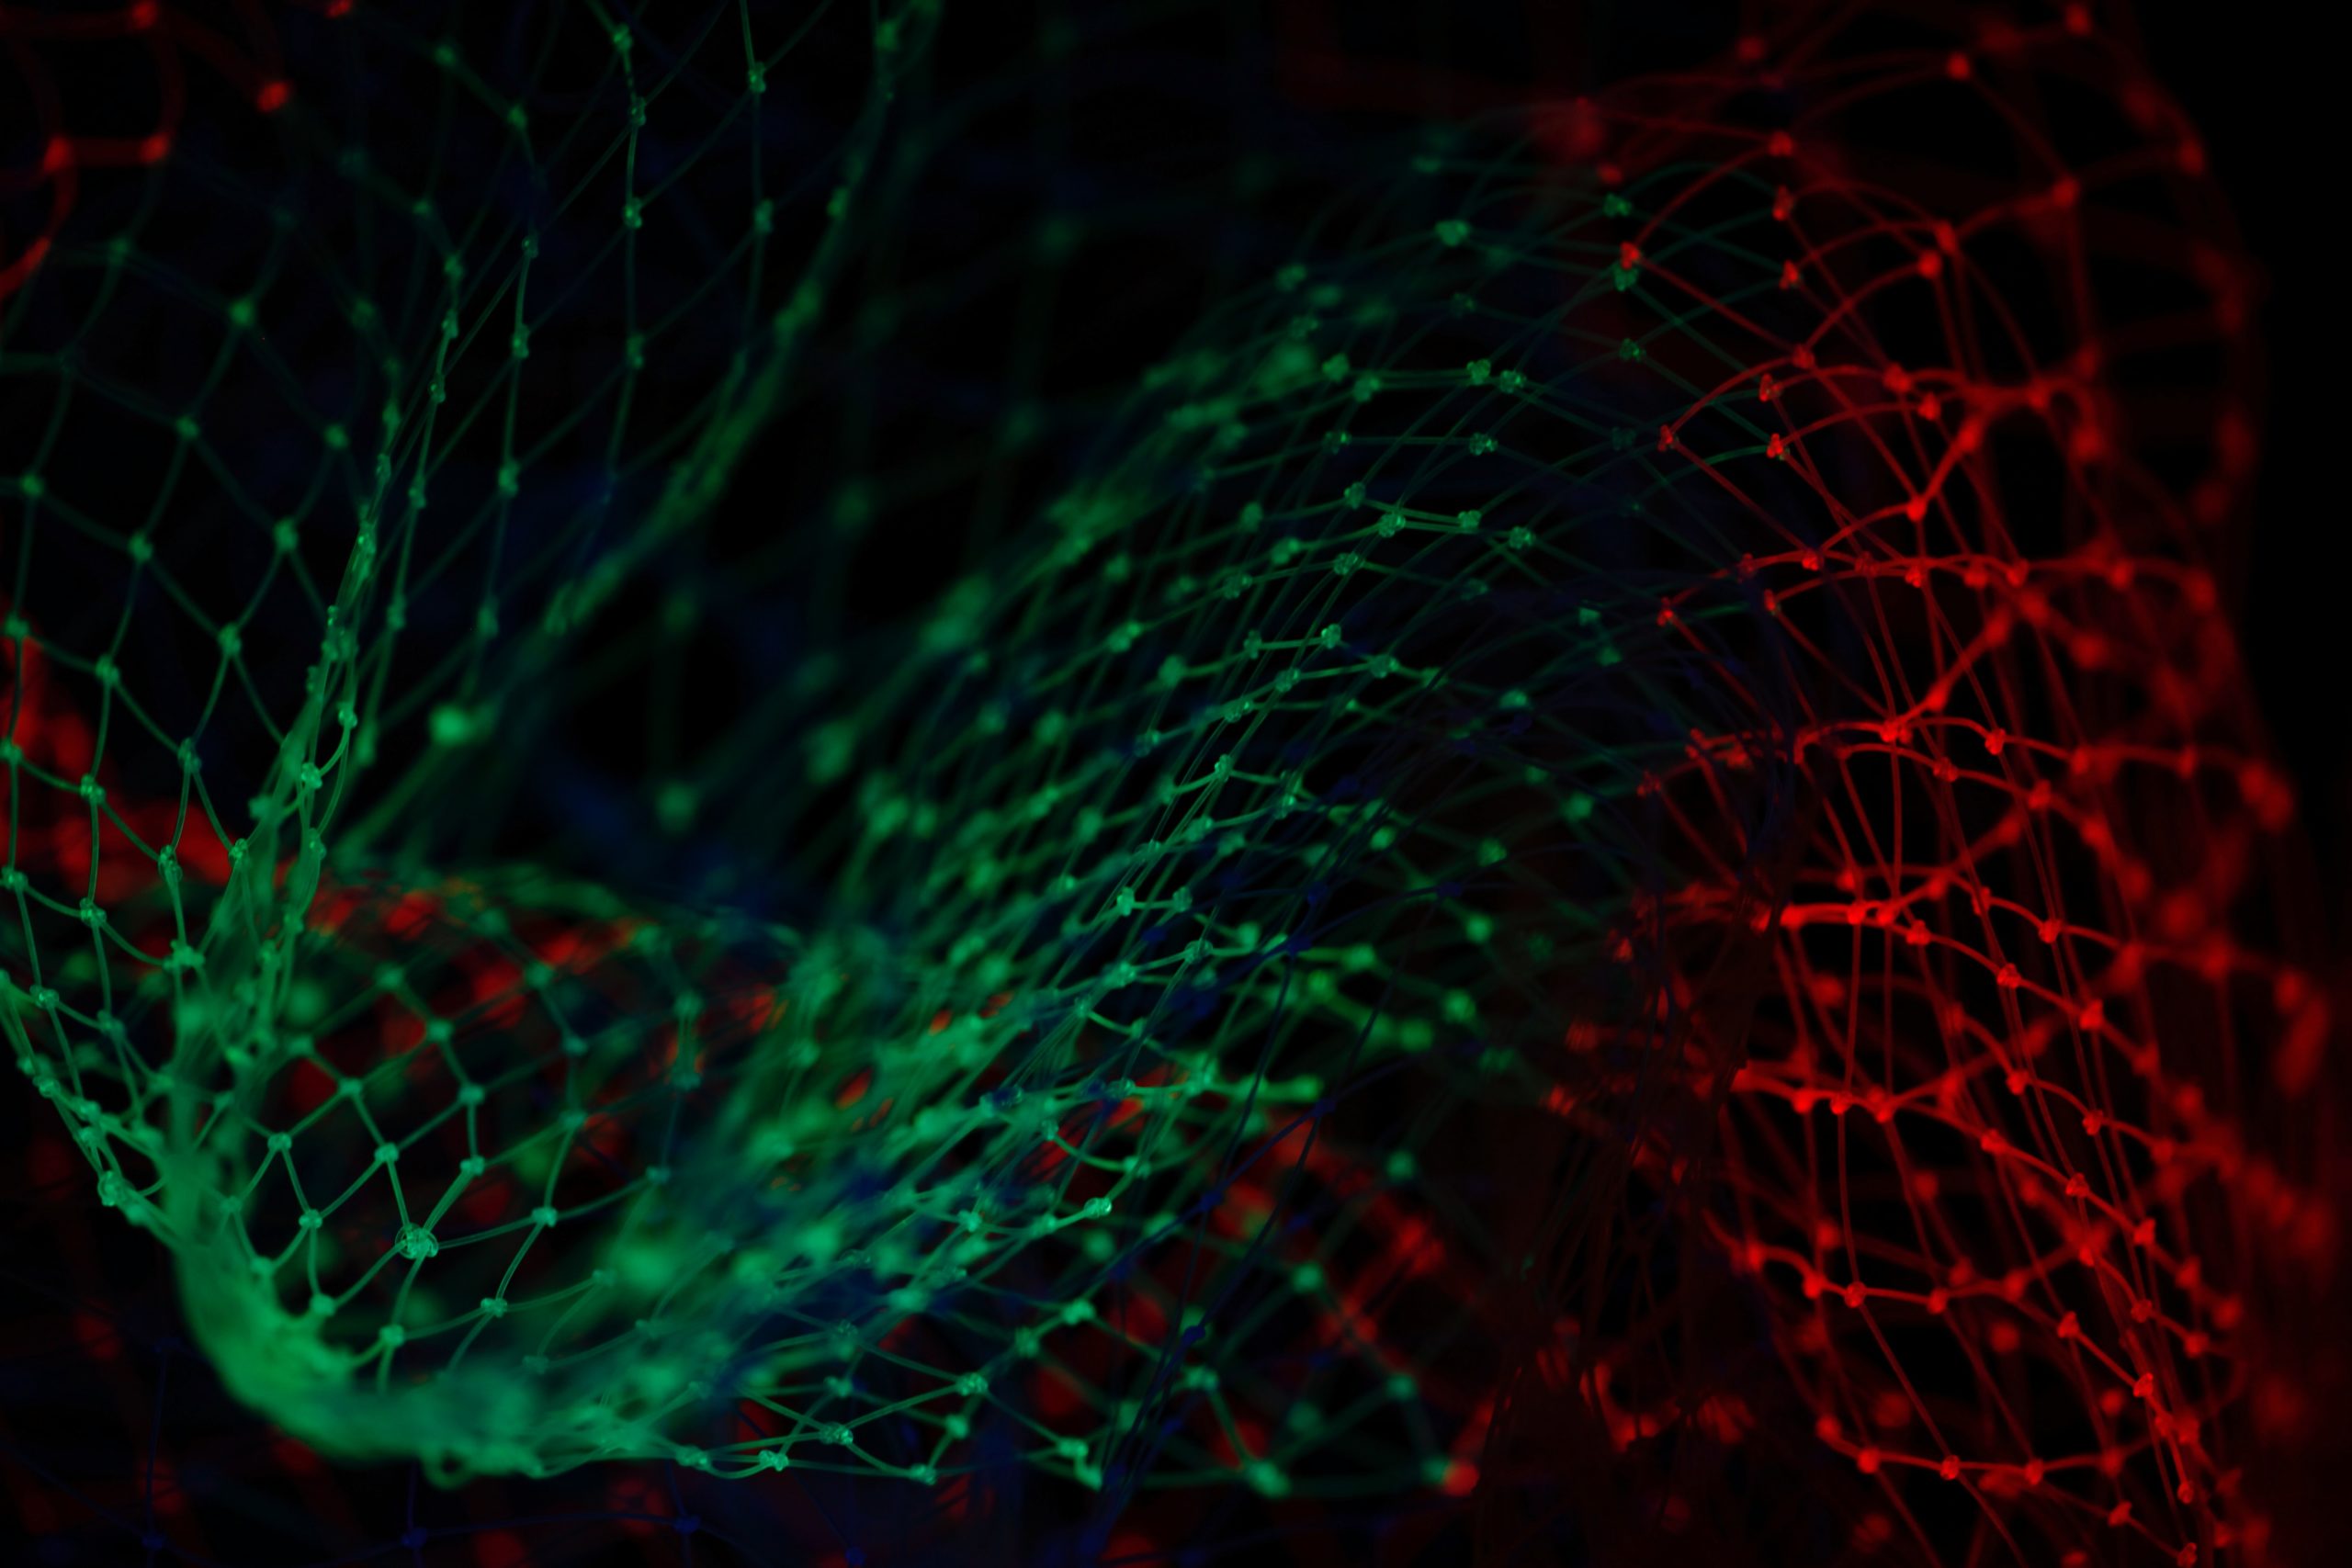 An abstract image of two green and red interconnected graphs